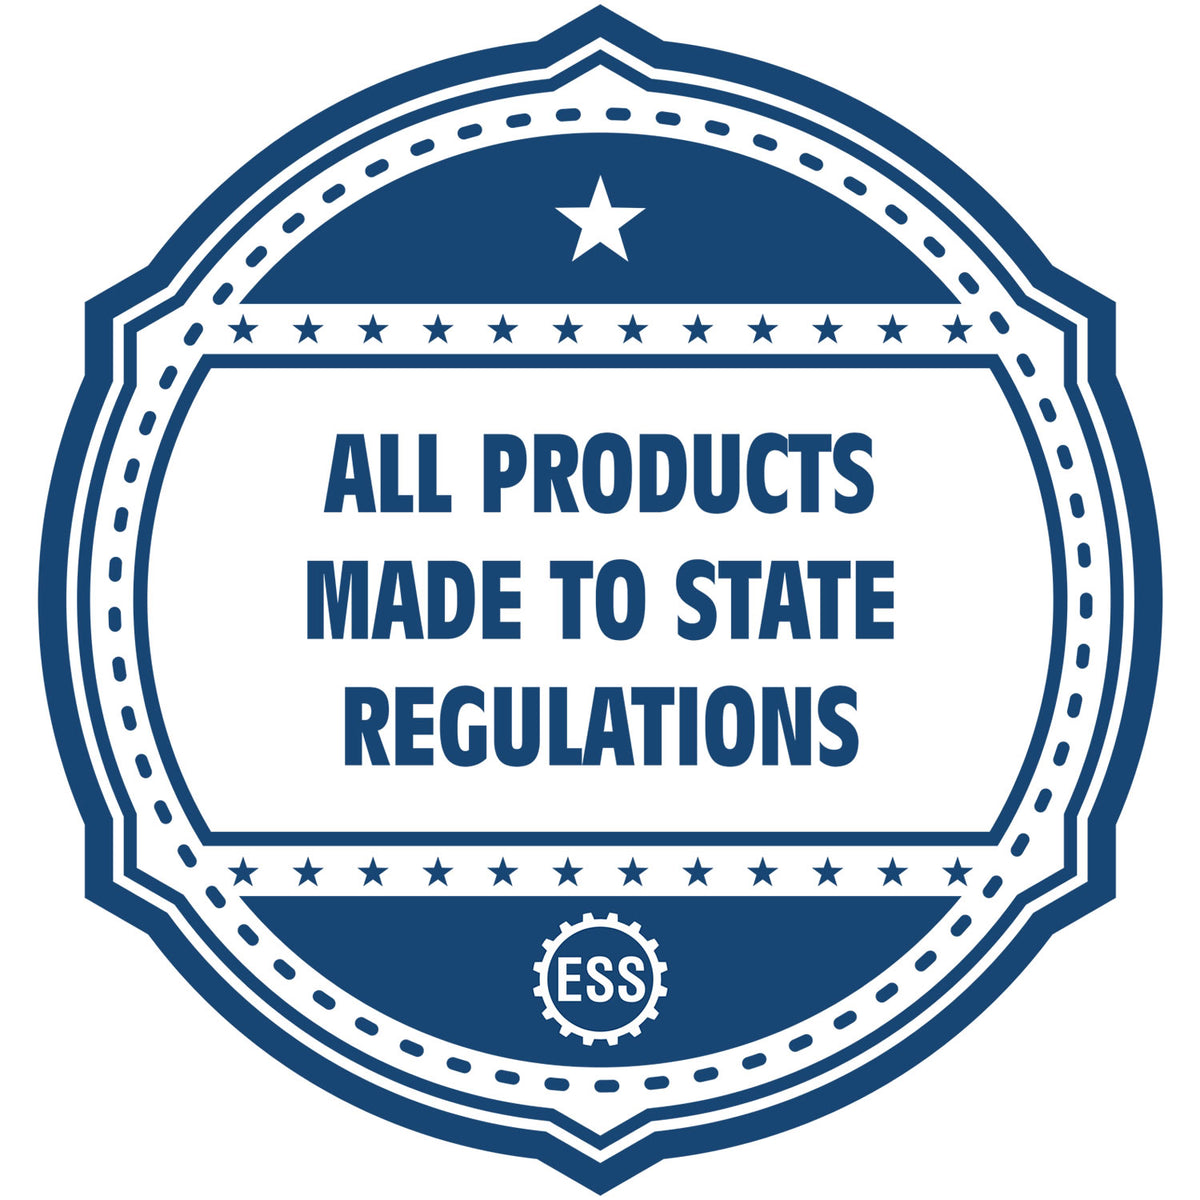 A blue icon or badge for the Heavy Duty Cast Iron Florida Geologist Seal Embosser showing that this product is made in compliance with state regulations.